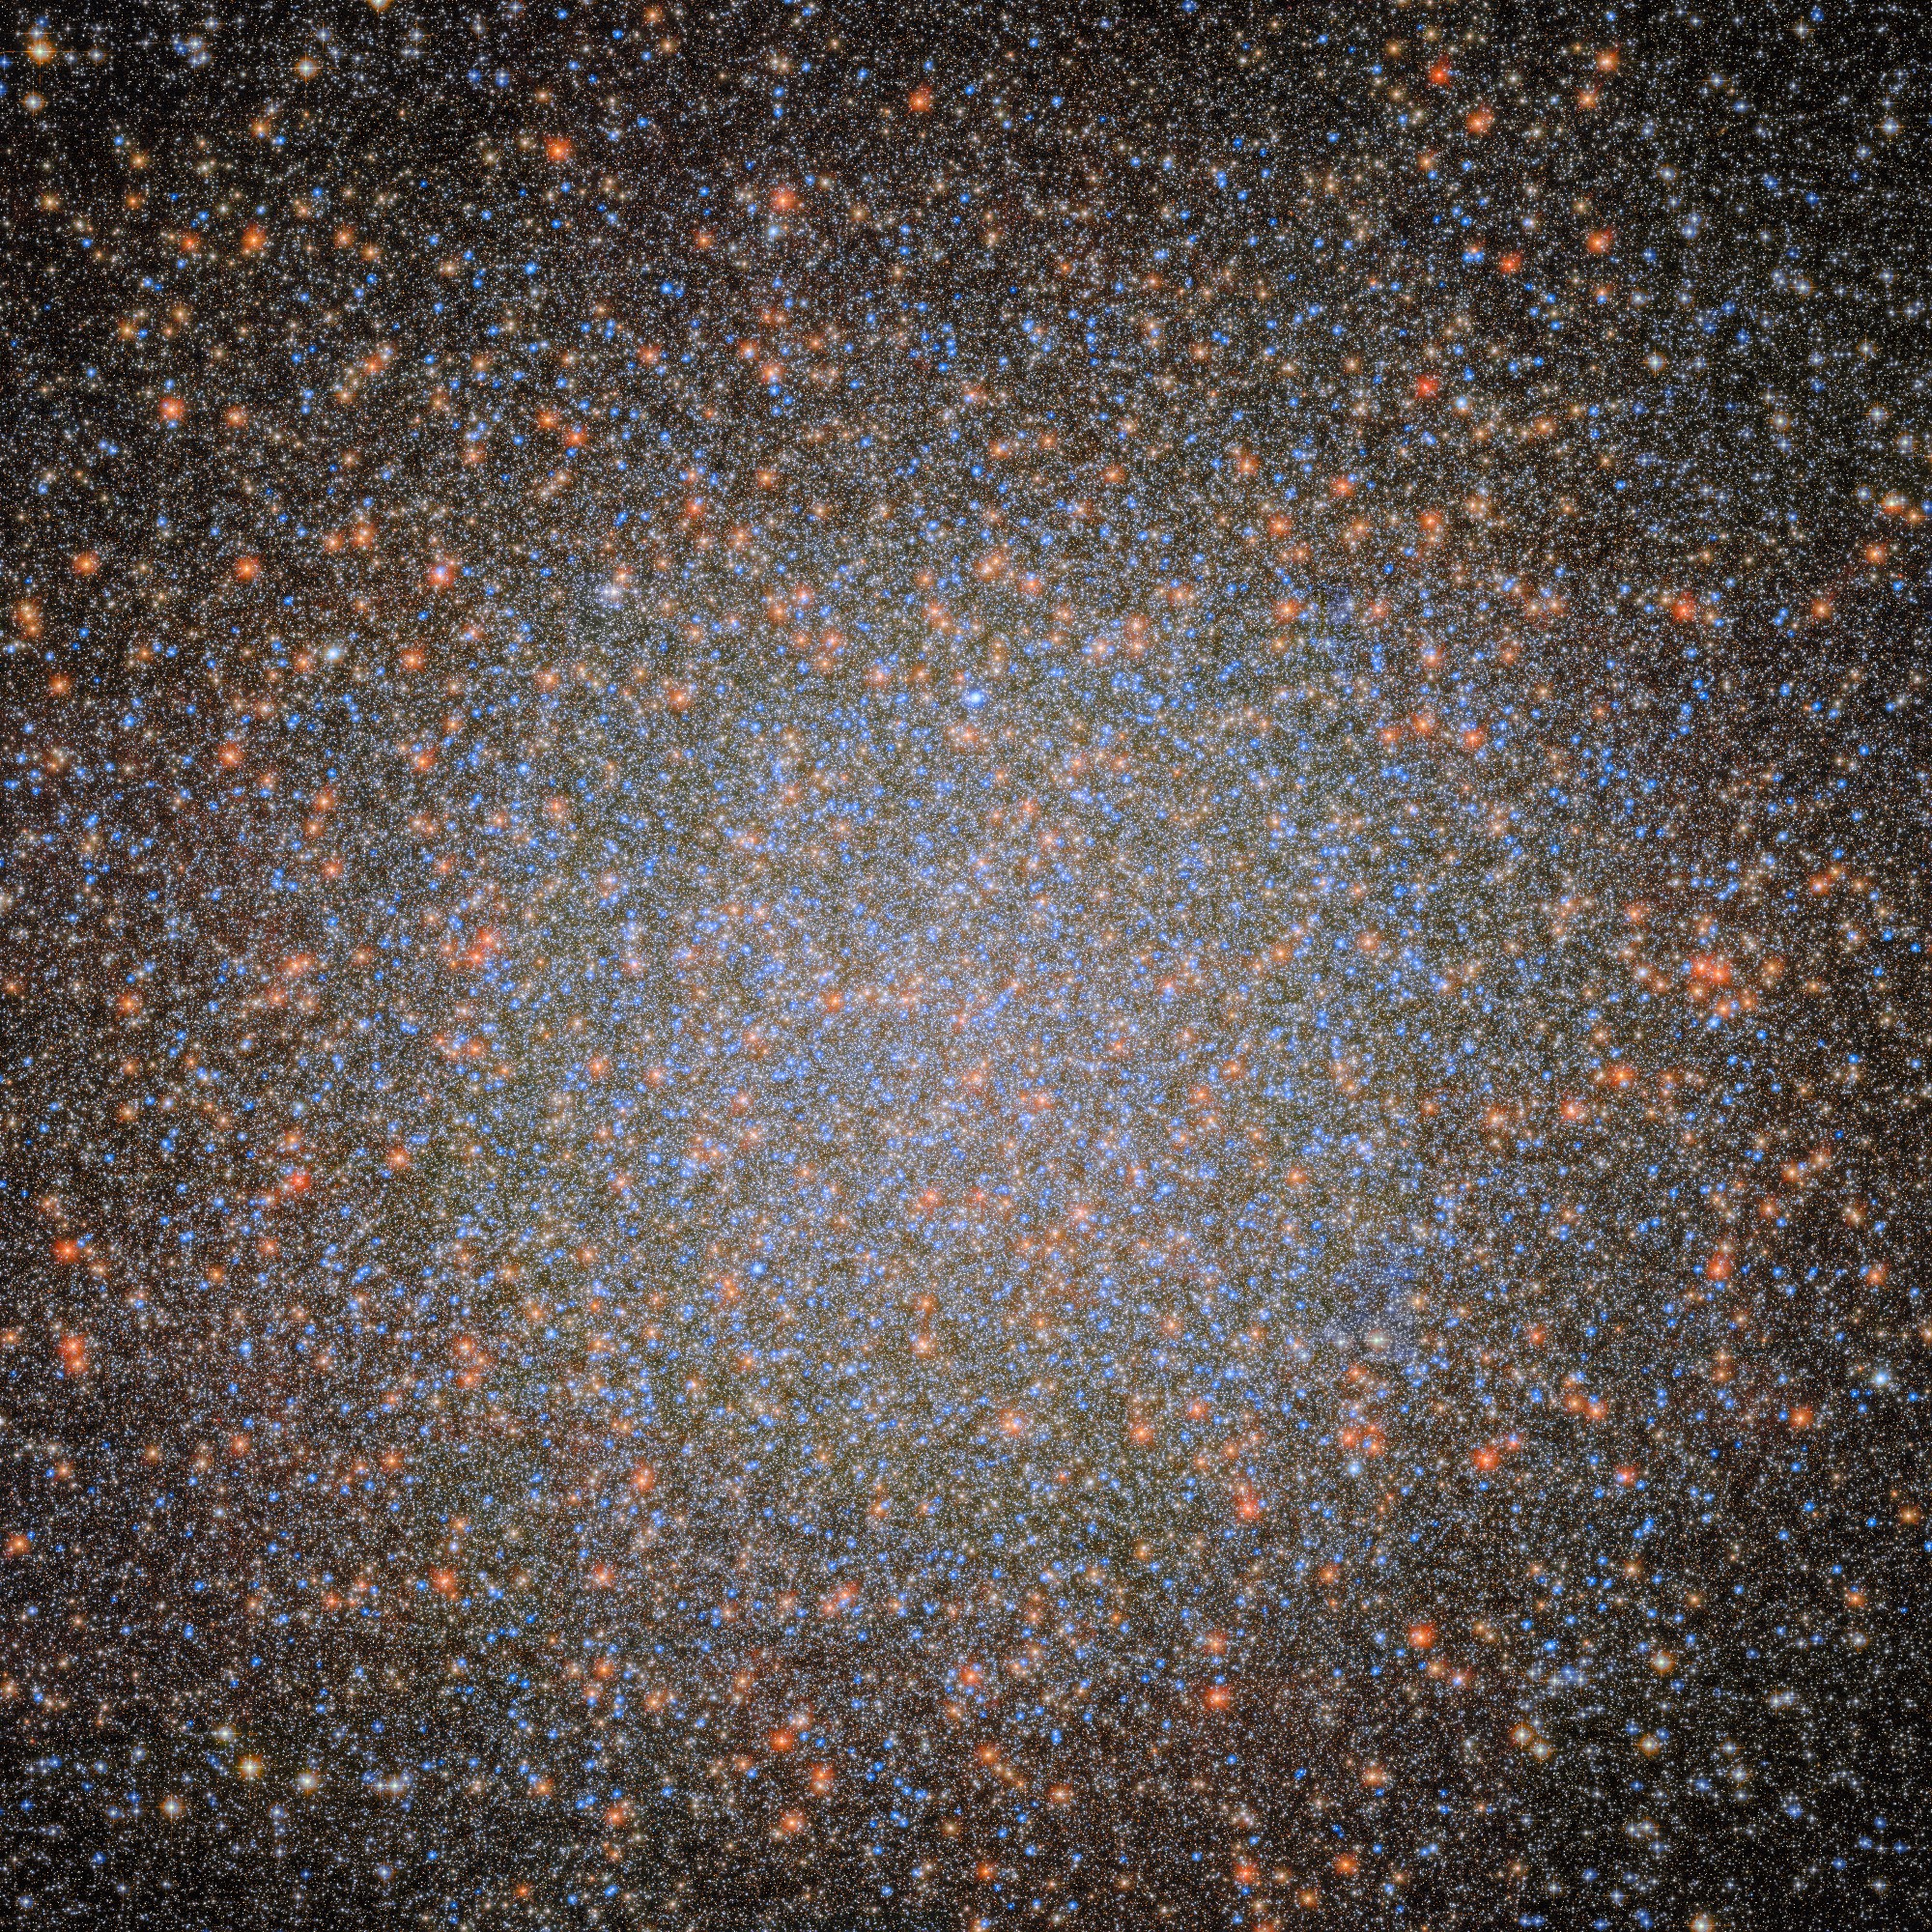 A Hubble image of the globular cluster Omega Centauri, a collection of myriad stars colored red, white, and blue on the black background of space.